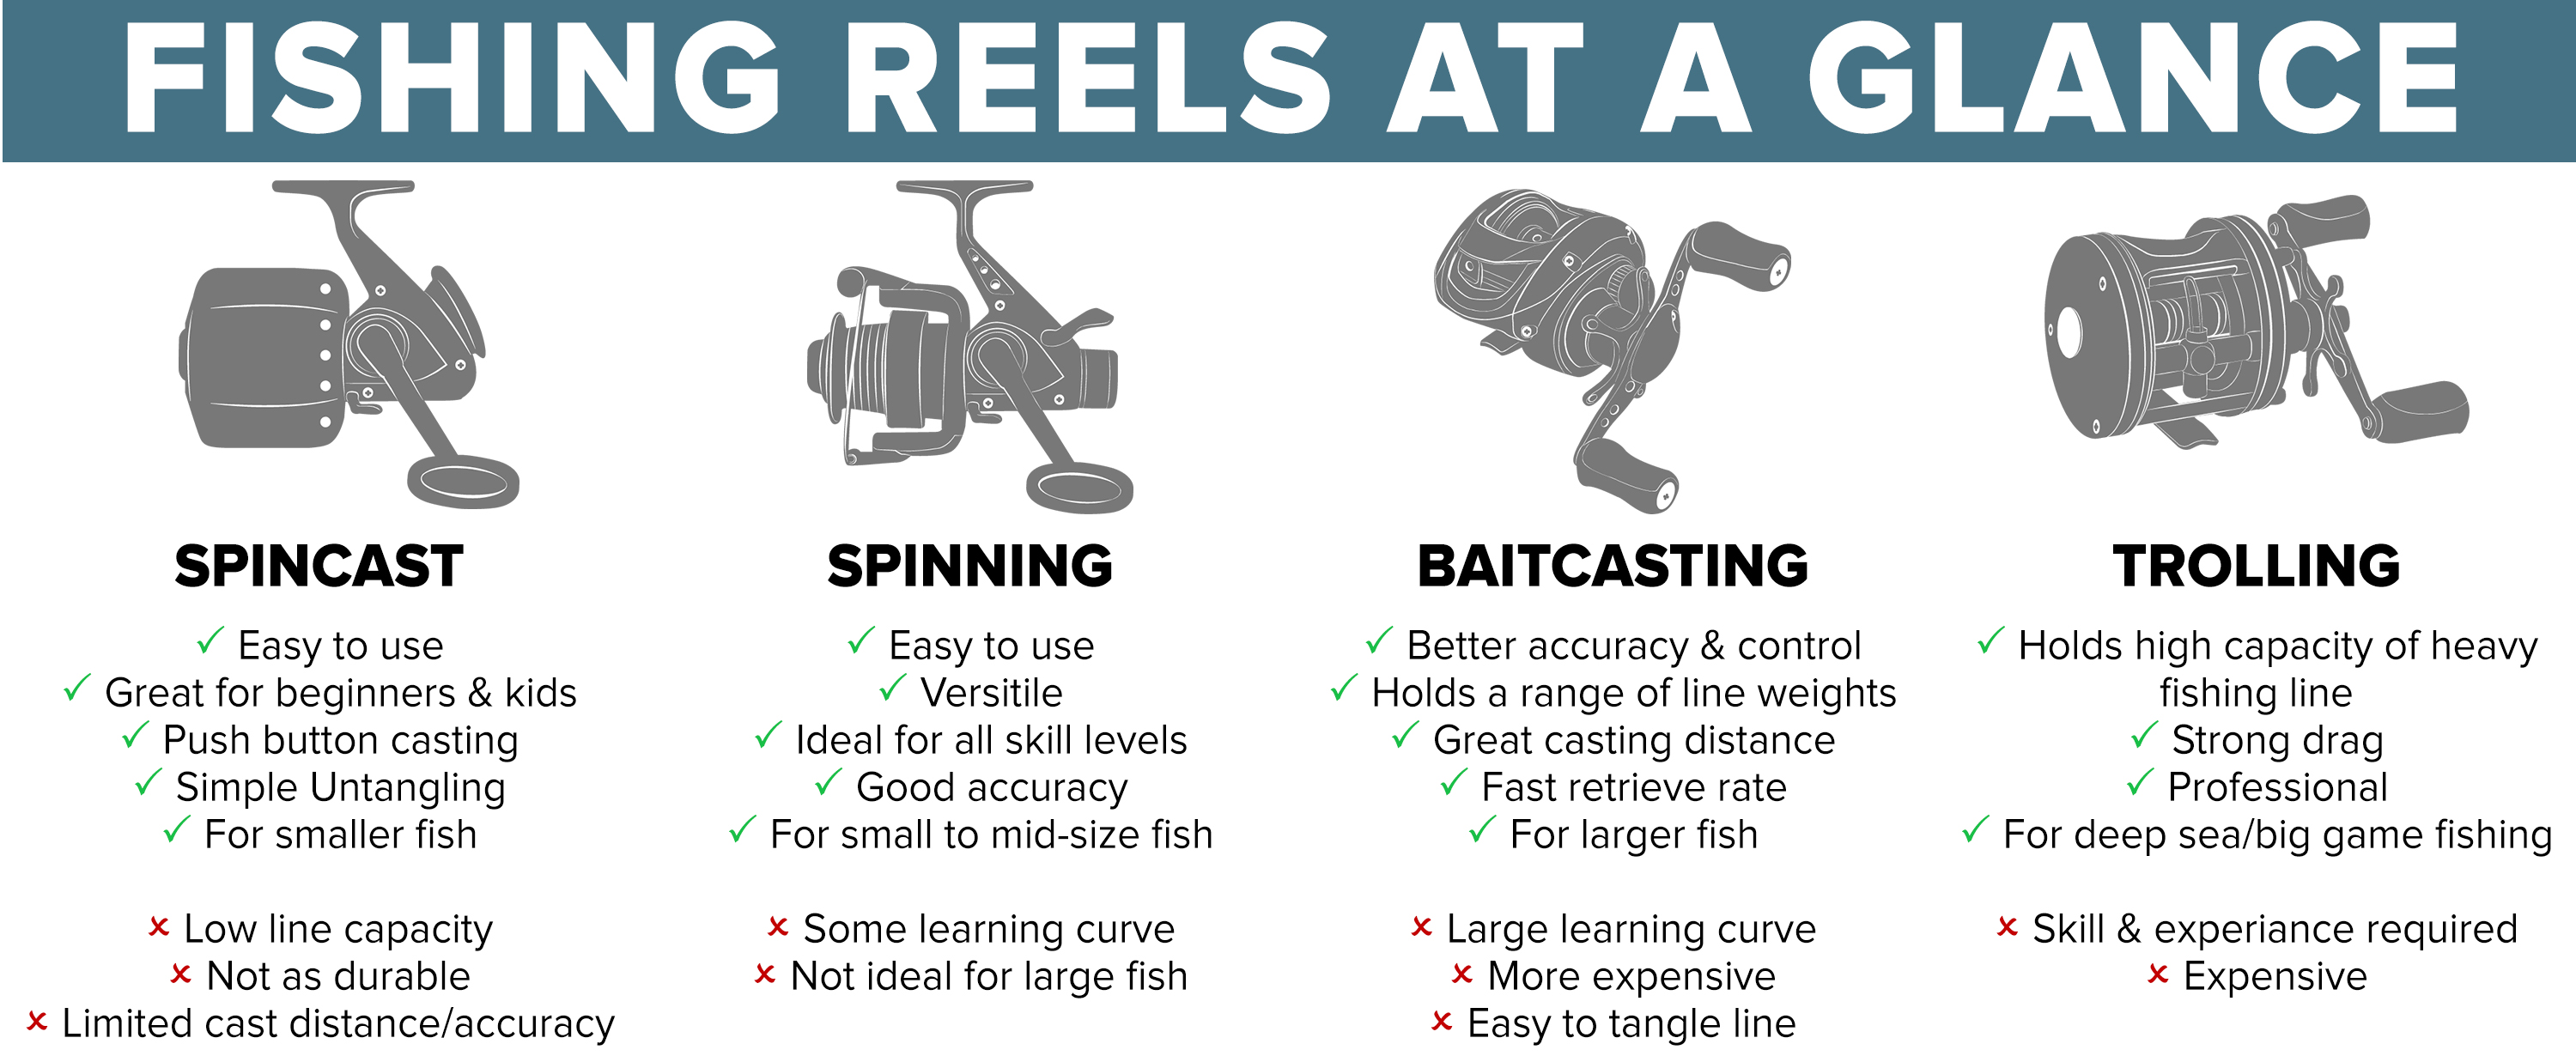 How to spool a baitcaster reel: HOW TO FISH 